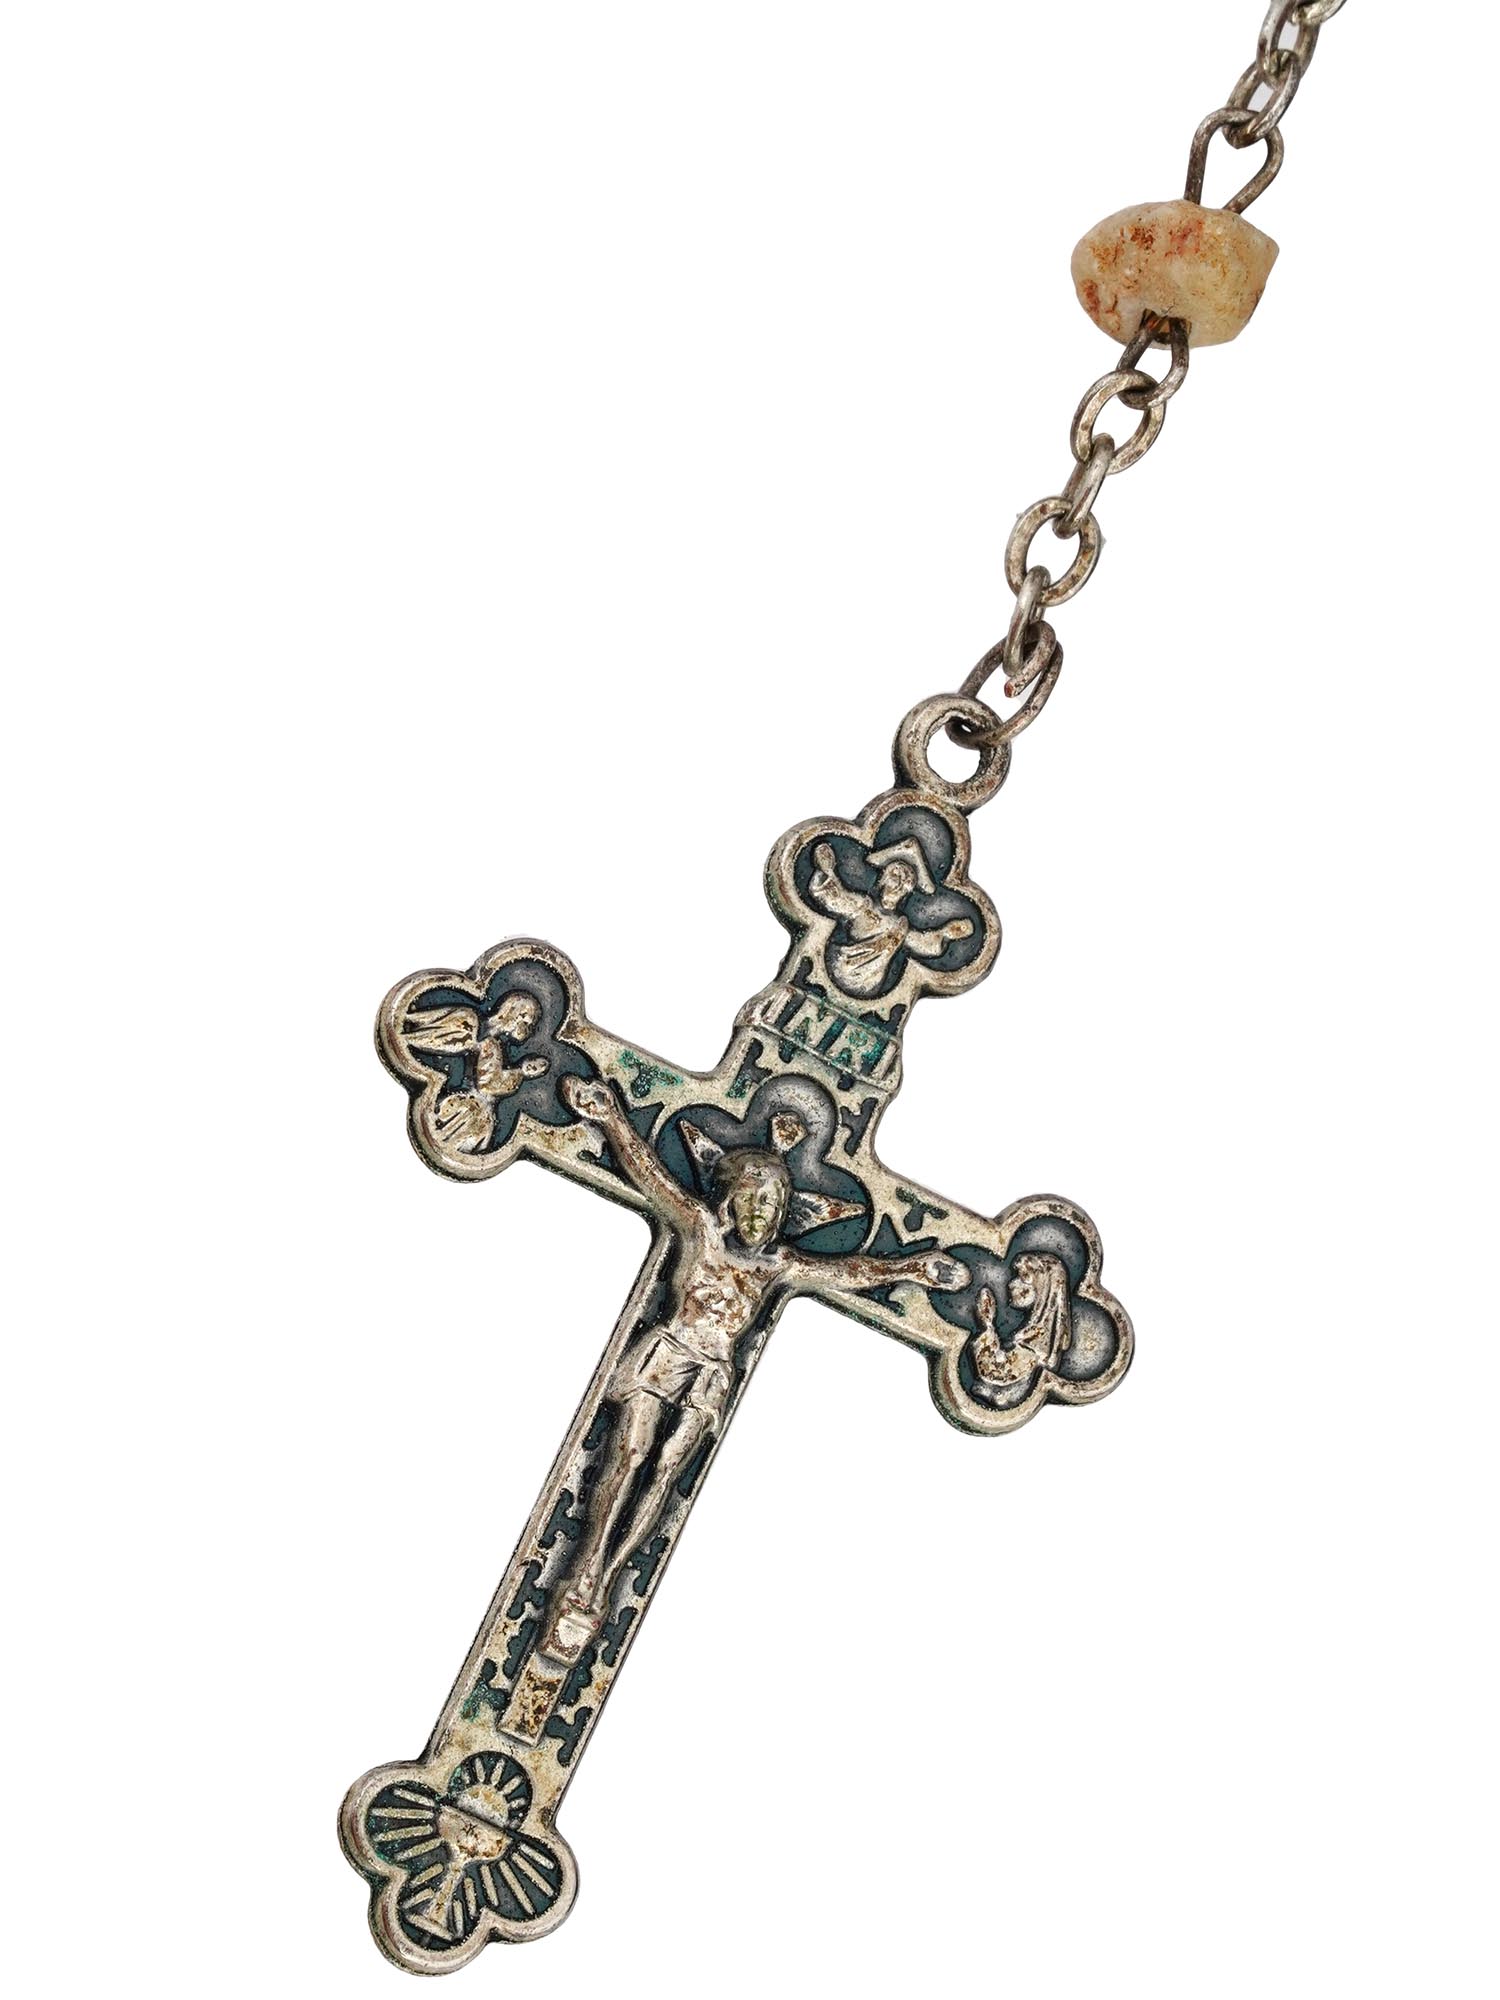 COLLECTION OF RELIGIOUS CROSSES, BROOCHES AND SPOON PIC-3